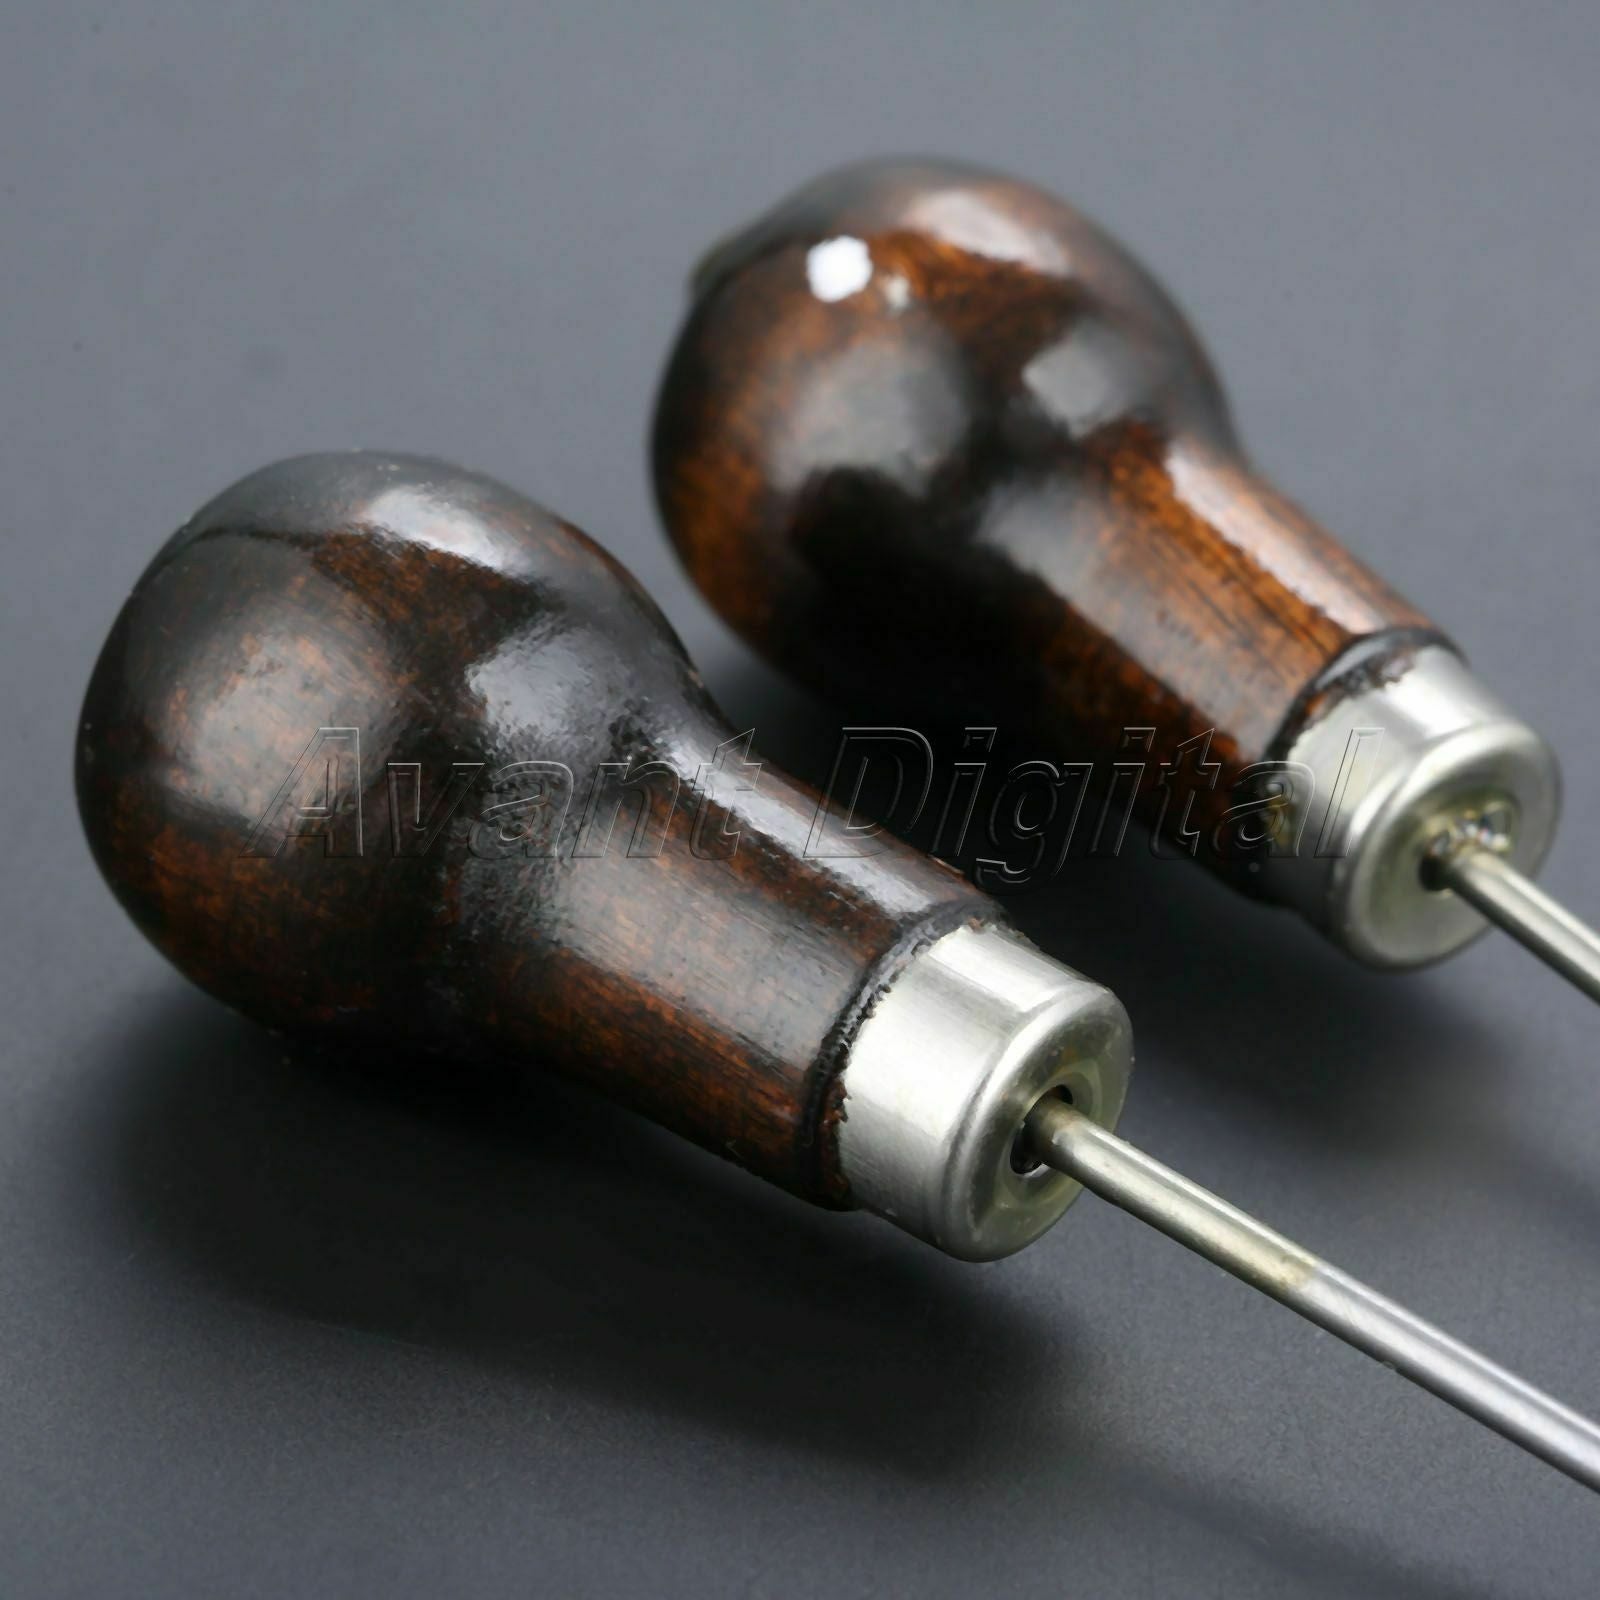 120mm Sewing Awls Leather Stitching Repair Tool 2Pcs Single Gourd Handle Pricker